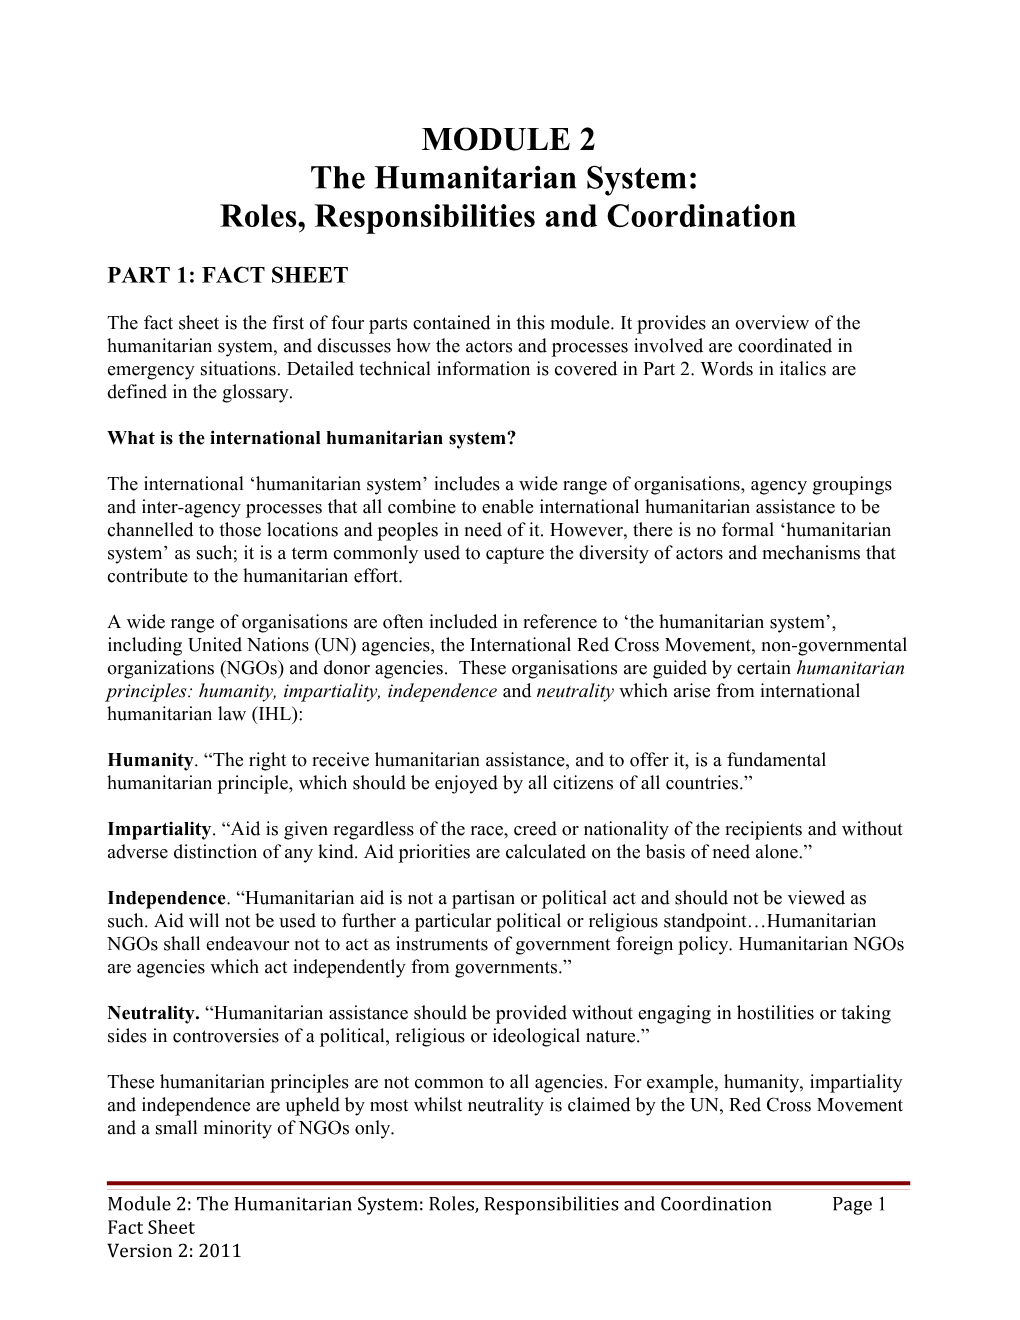 The Humanitarian System: Roles, Responsibilities and Coordination